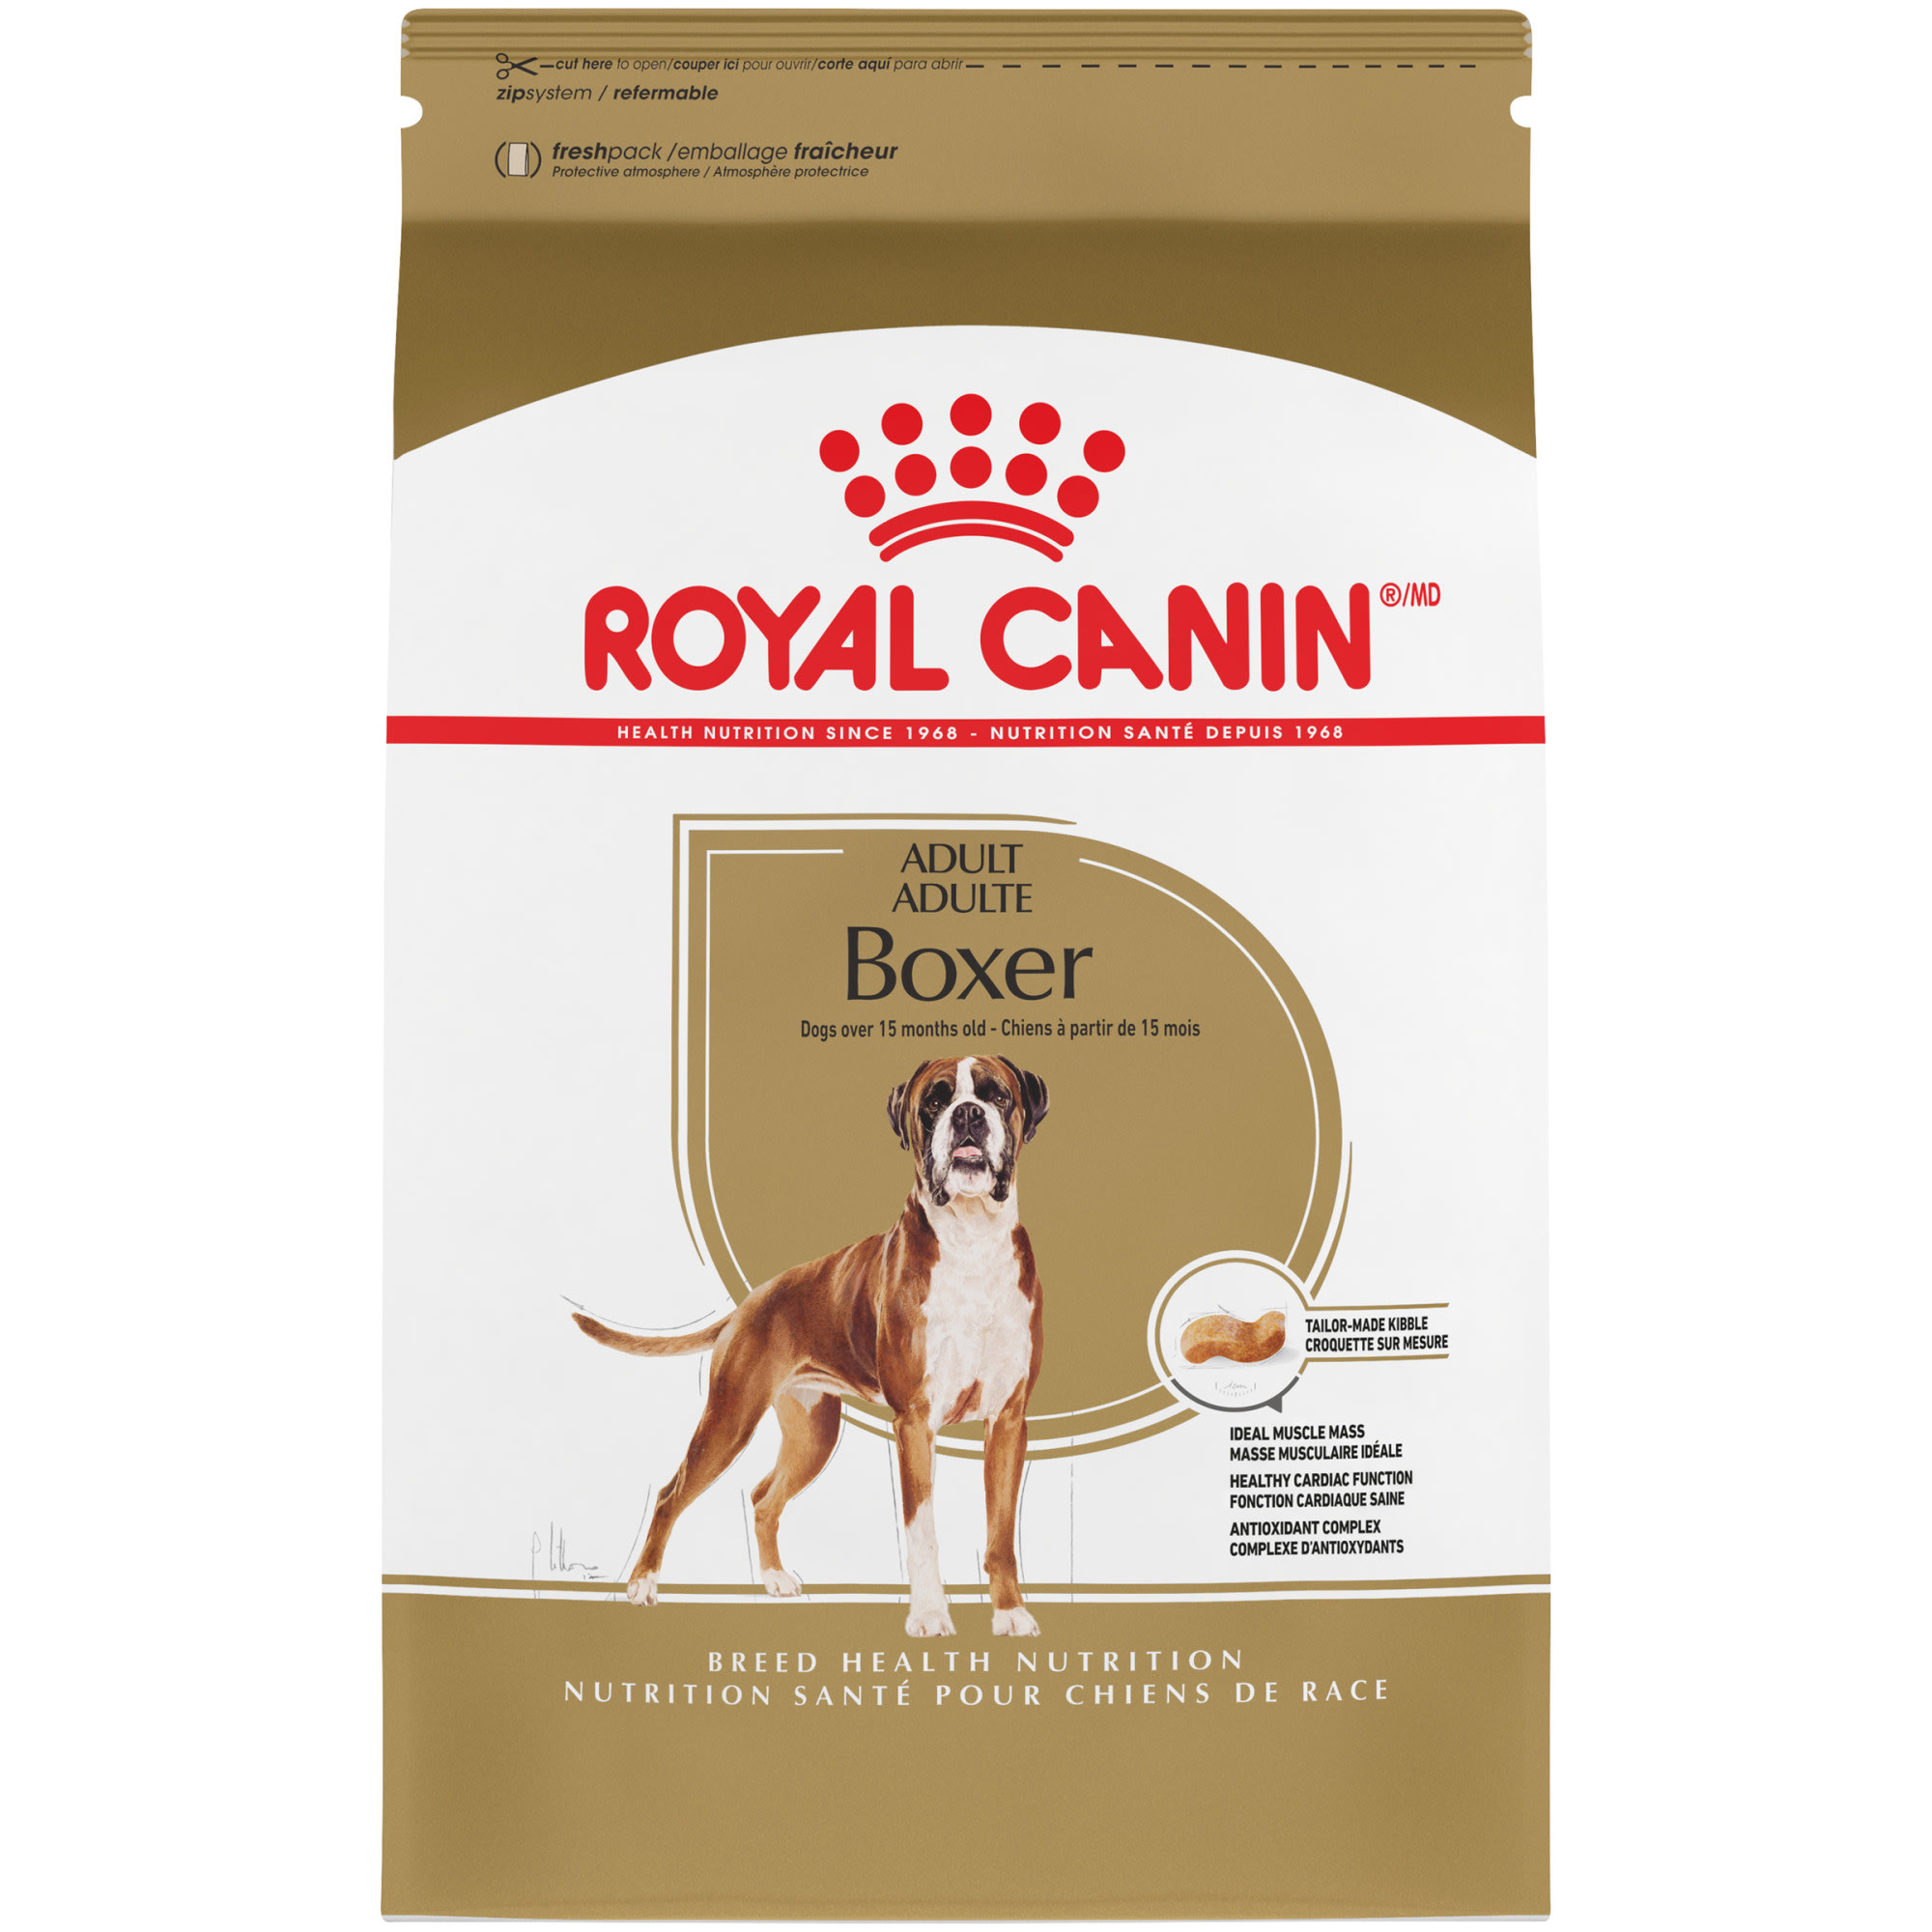 Royal Canin Breed Health Nutrition Boxer Adult Dry Dog Food, 30 lbs.